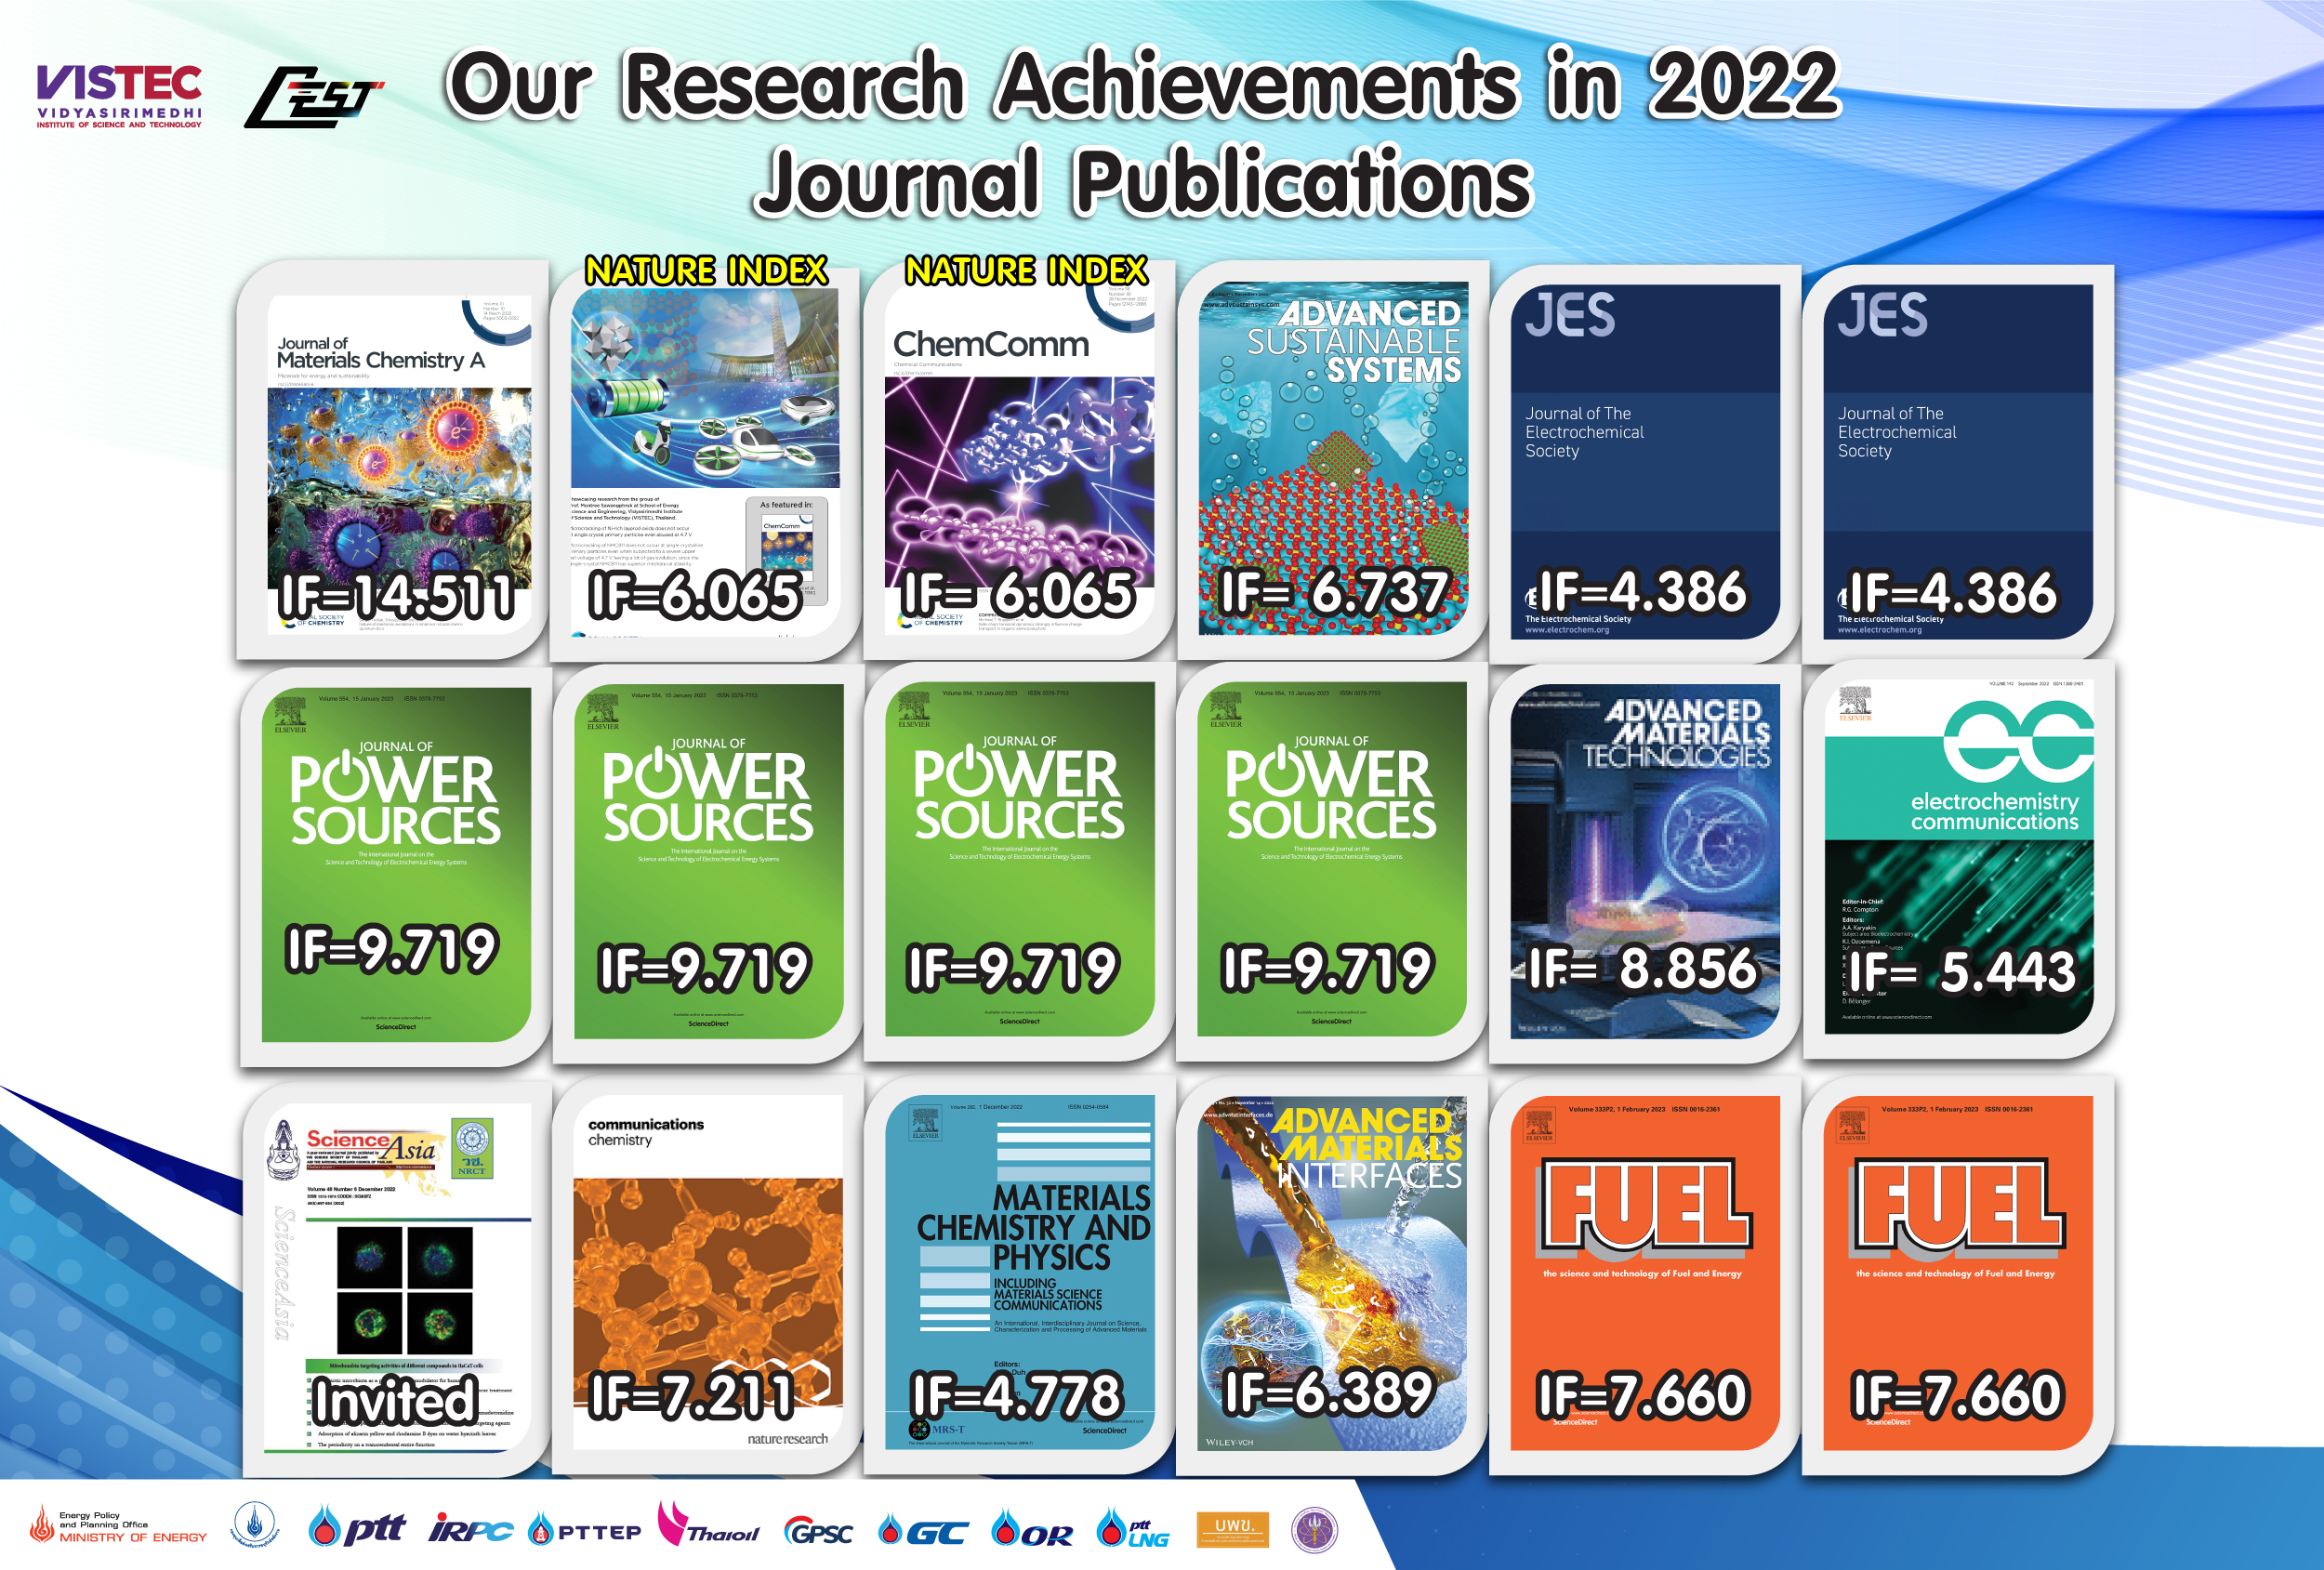 Time flies! It is time to celebrate our research achievements in 2022. Many Thanks to our research sponsors, collaborators, colleagues,  and especially our research team for your great contributions.